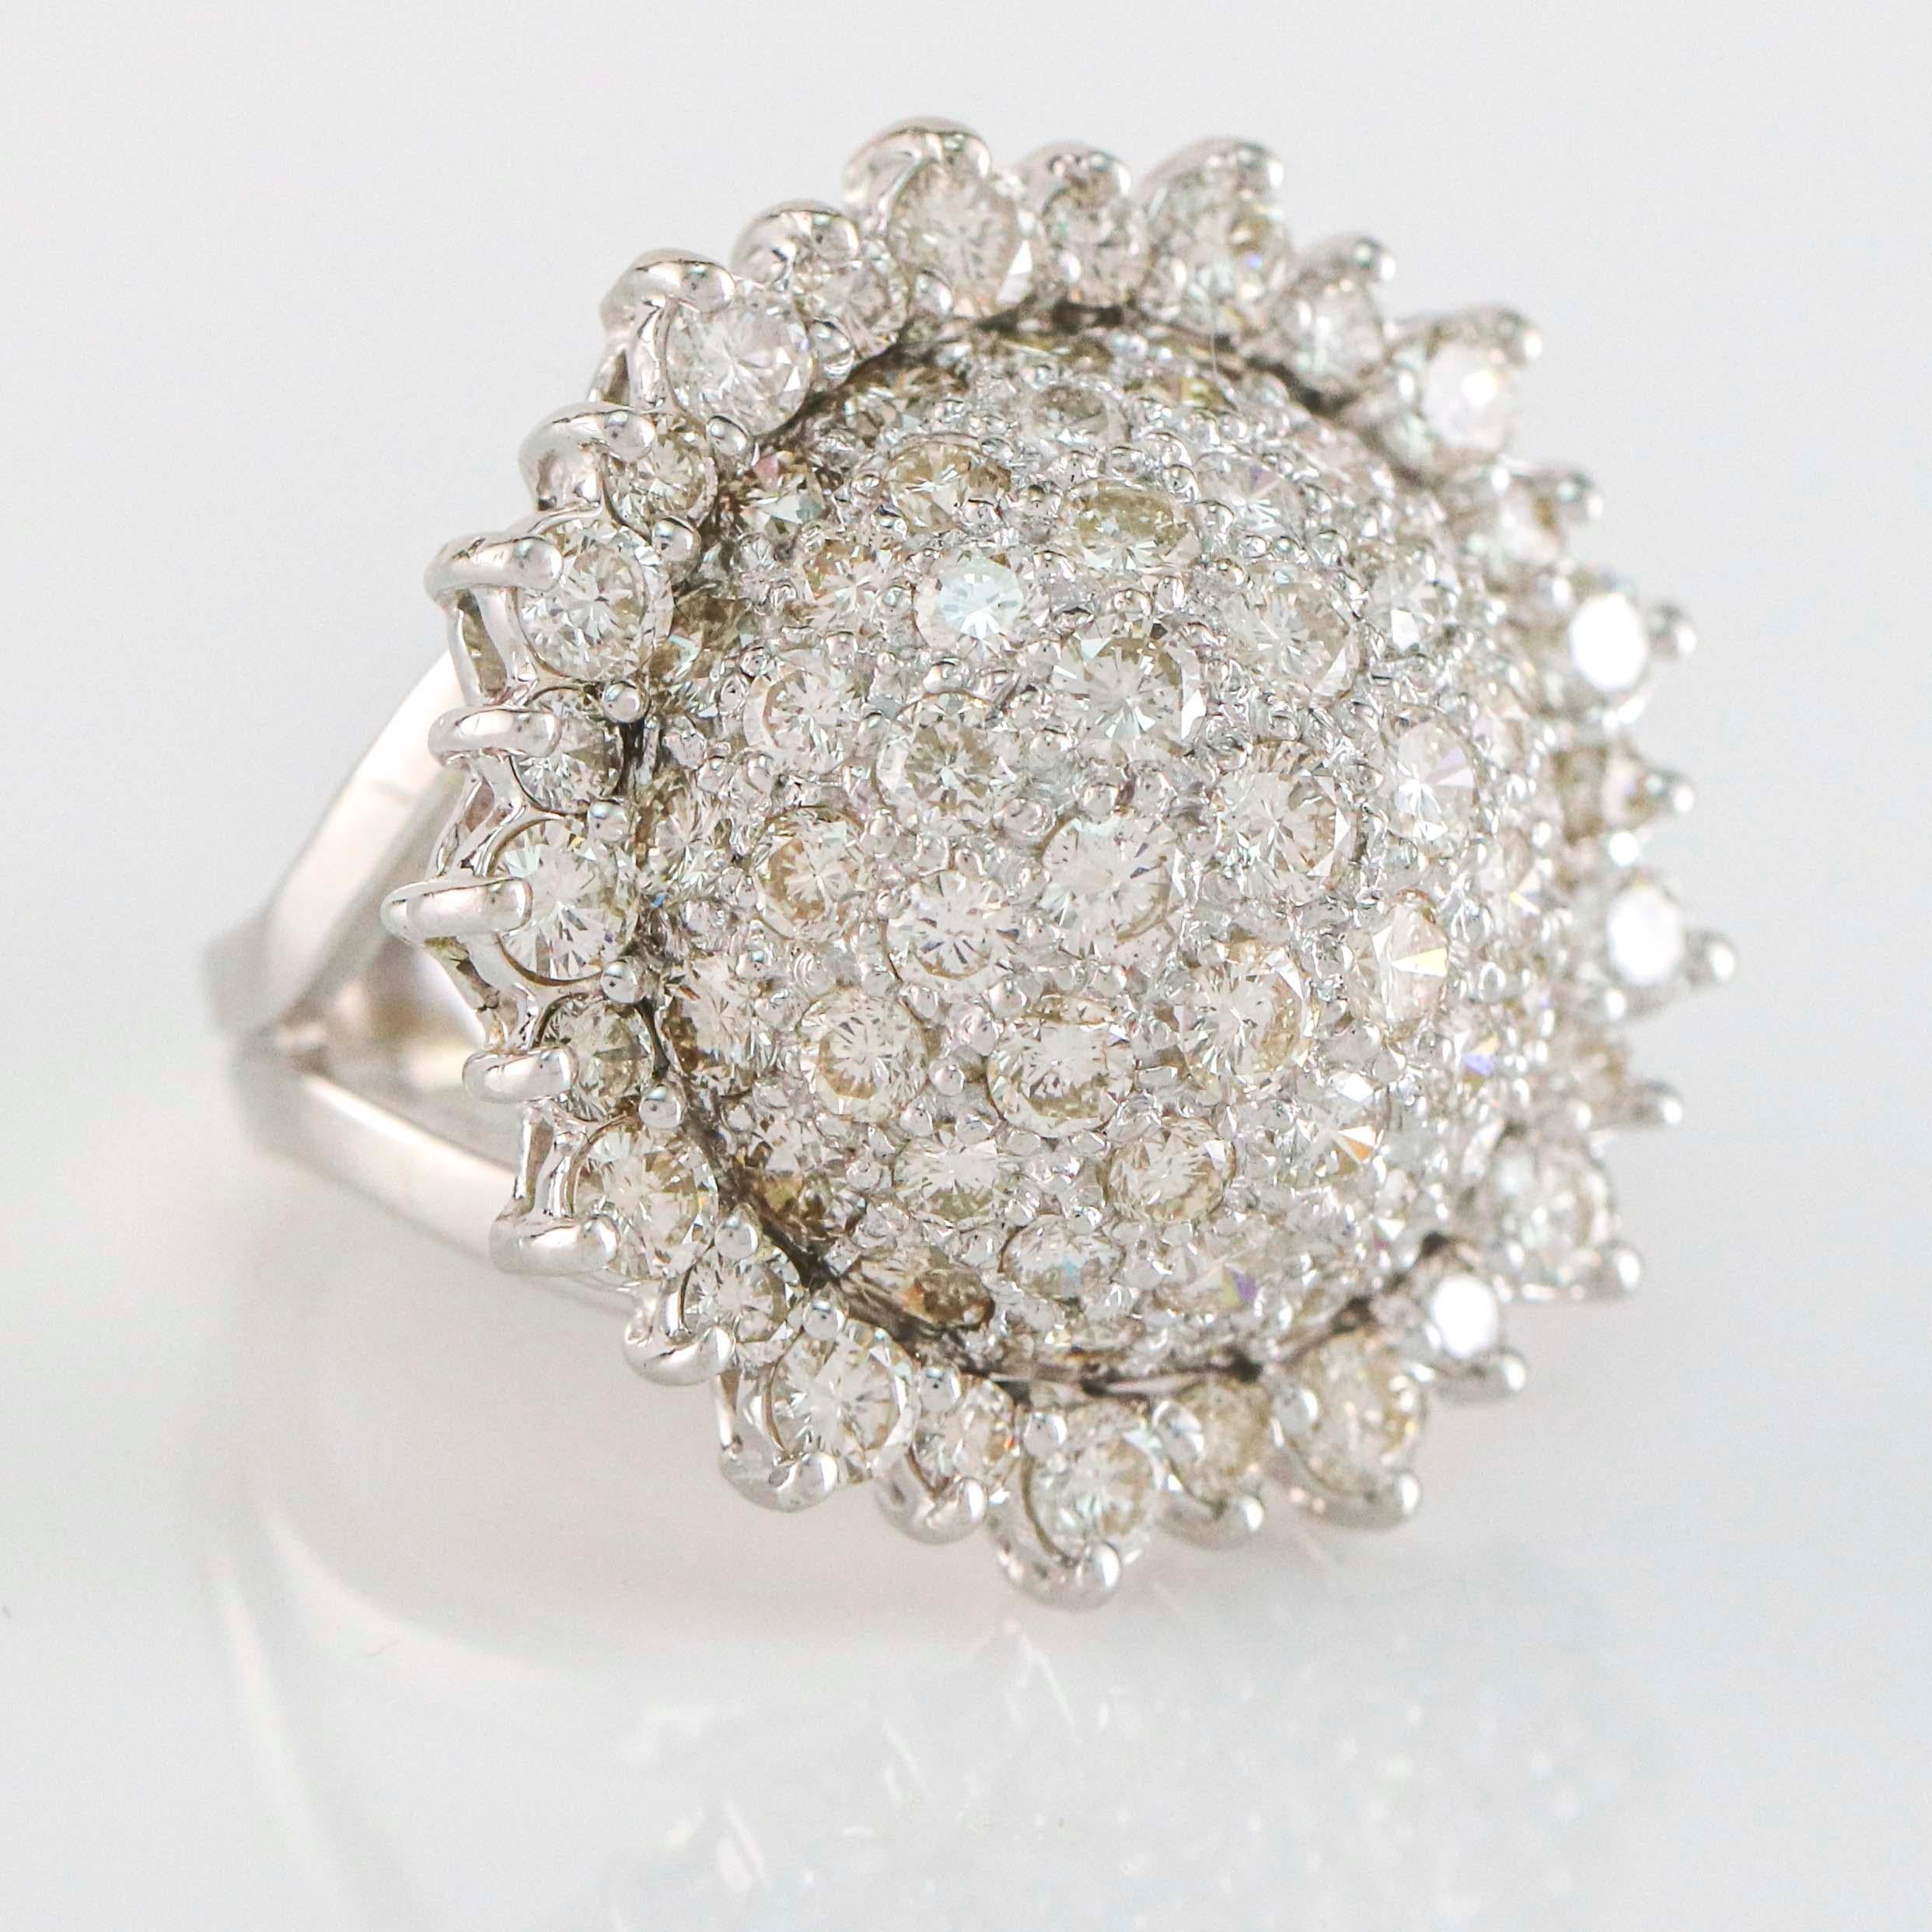 Sunflower motif ring in 14 karat white gold. Size 7. The ring is pave set with 3.75 carats of round cut diamonds.